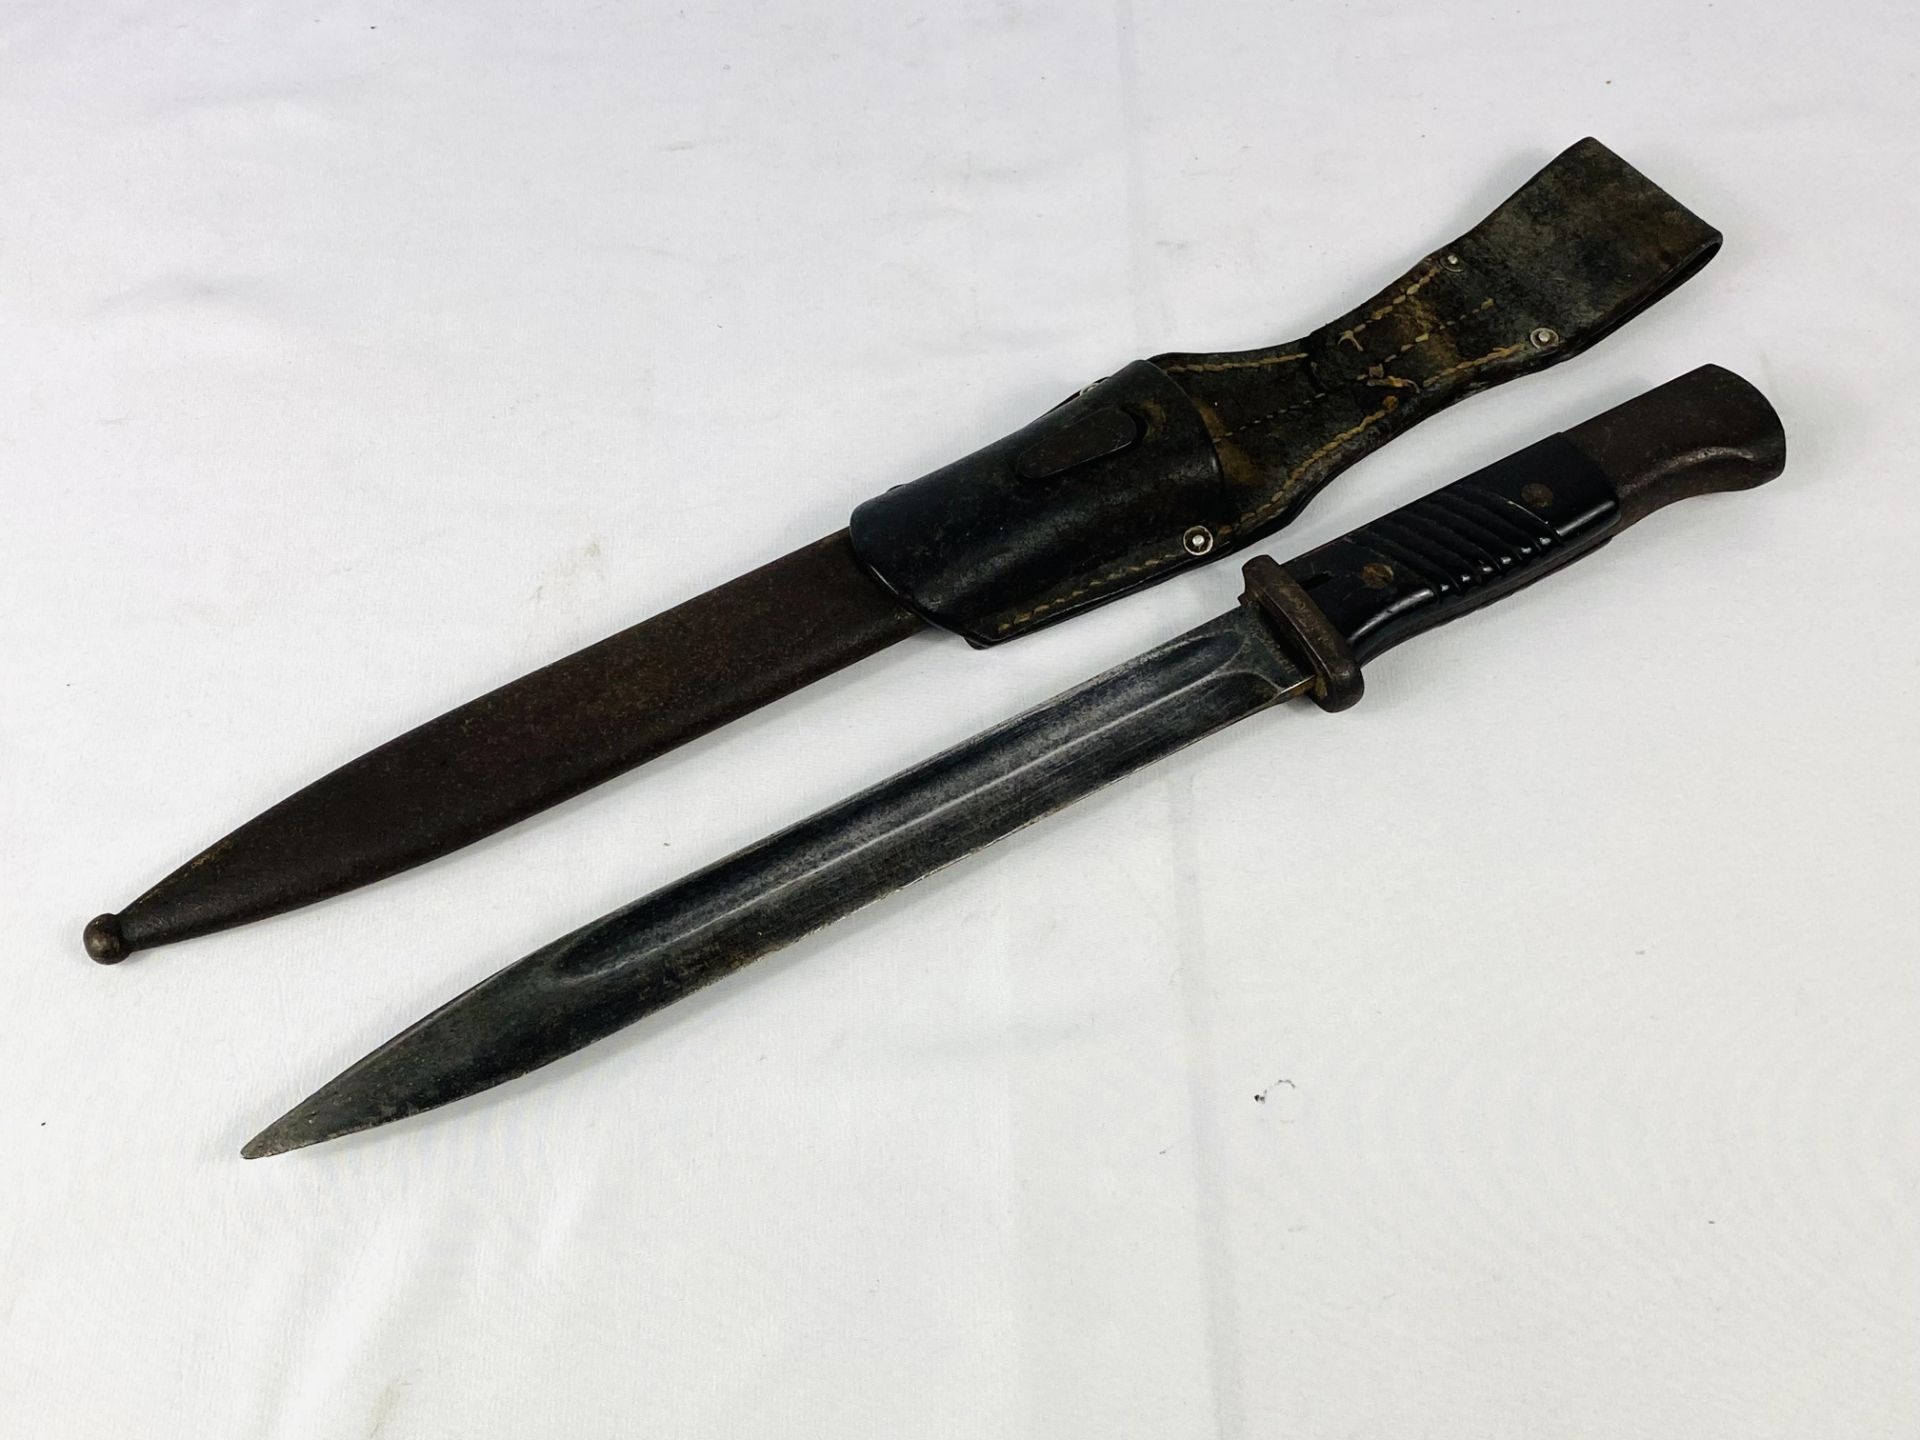 World War II bayonet written to blade Coppell G.m.b.H N20995K in leather scabbard. - Image 2 of 4